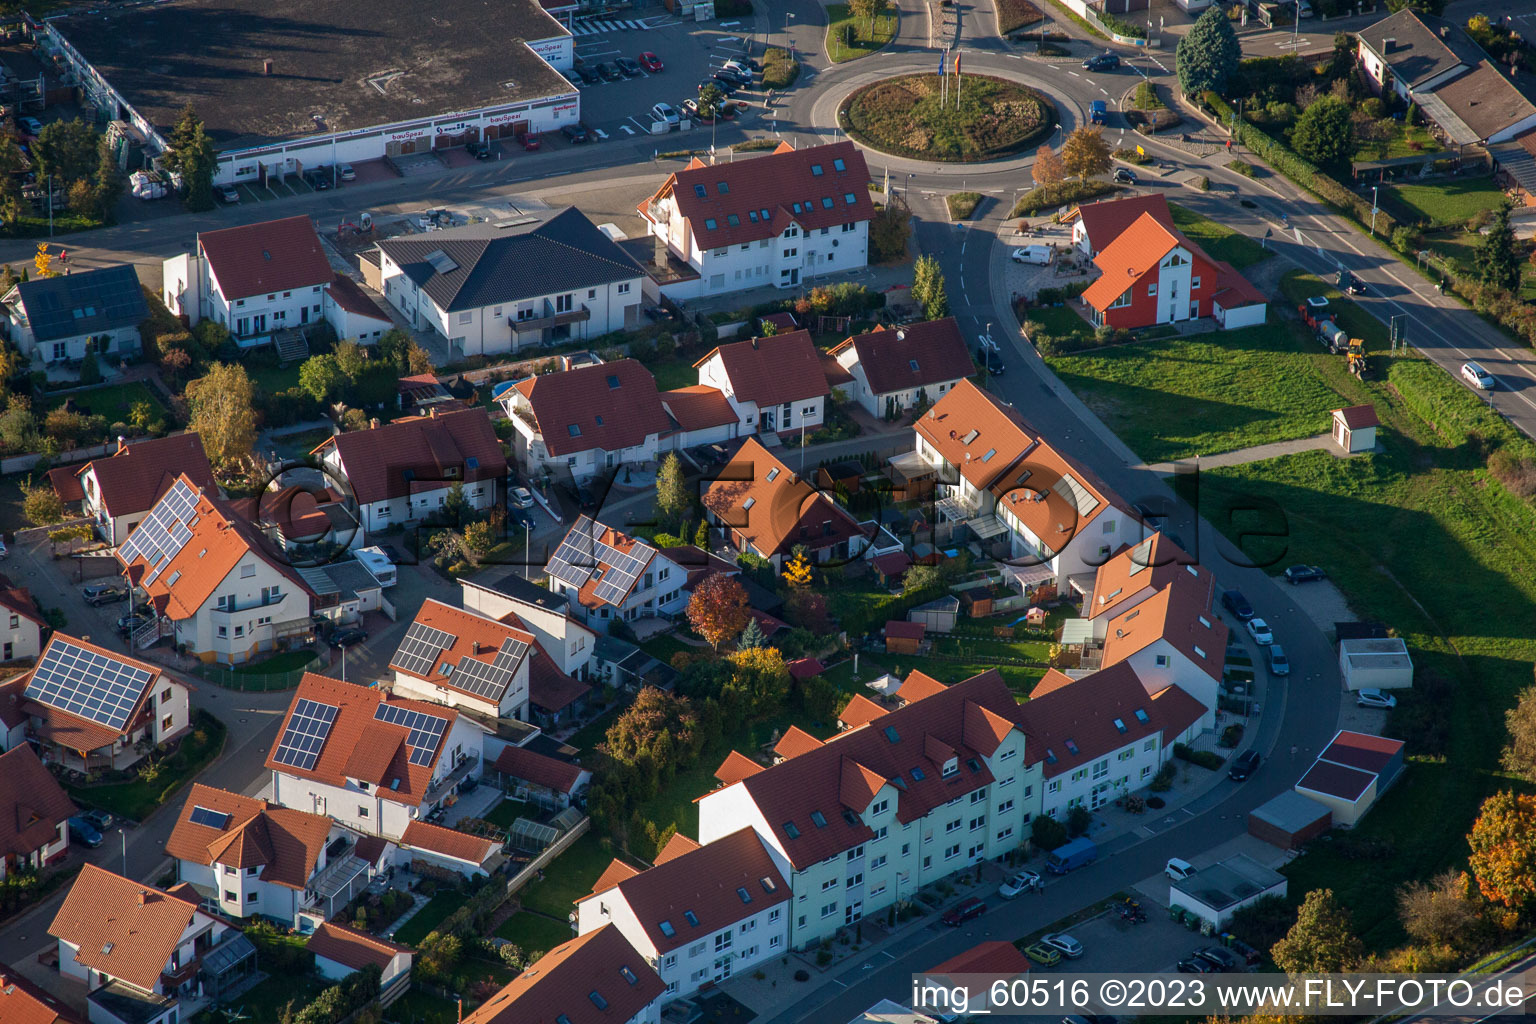 S in Rülzheim in the state Rhineland-Palatinate, Germany from above